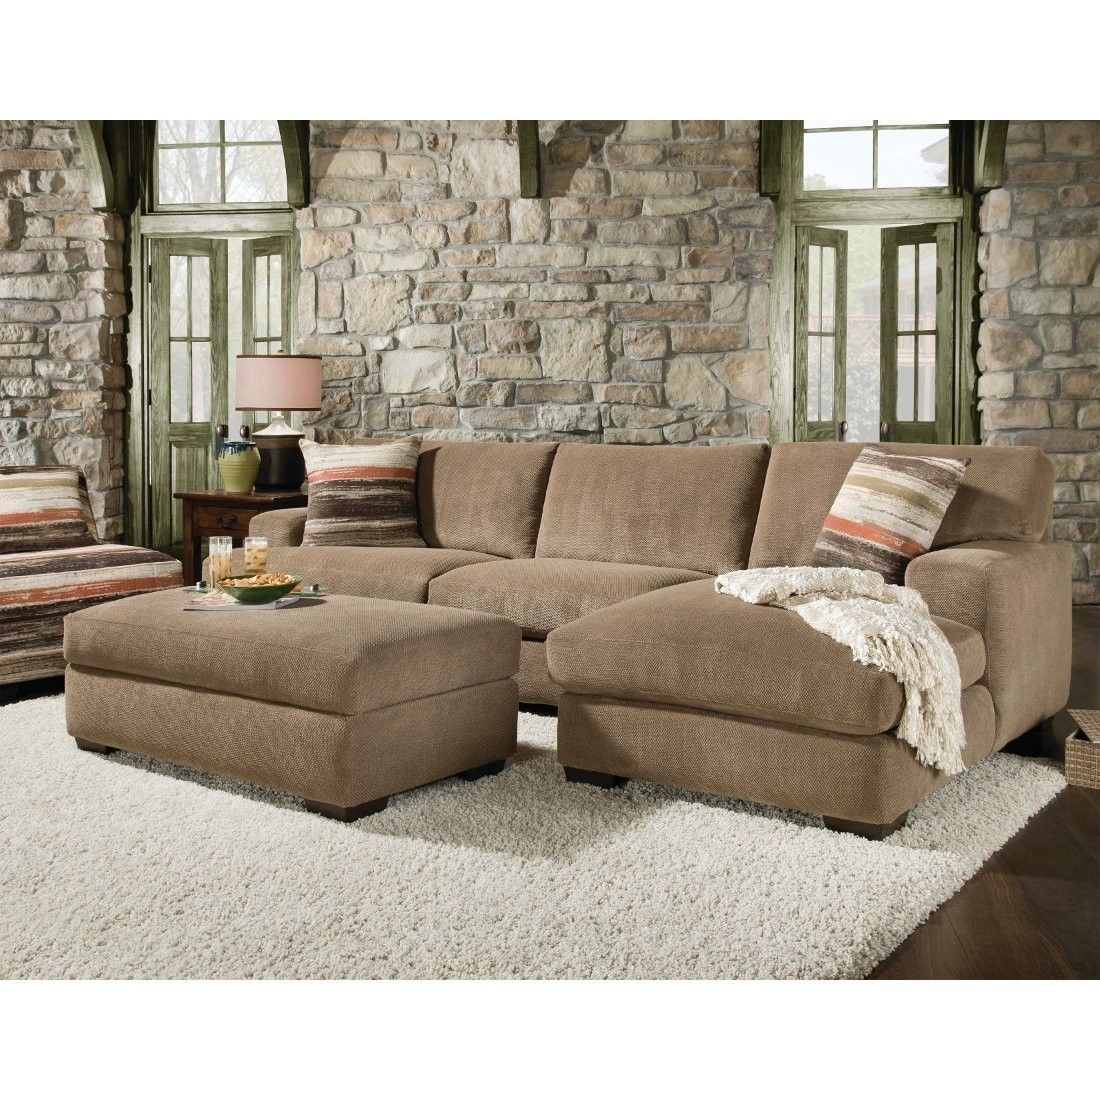 Beautiful Sectional Sofa With Chaise And Ottoman Pictures With Regard To Long Sectional Sofas With Chaise (View 10 of 10)